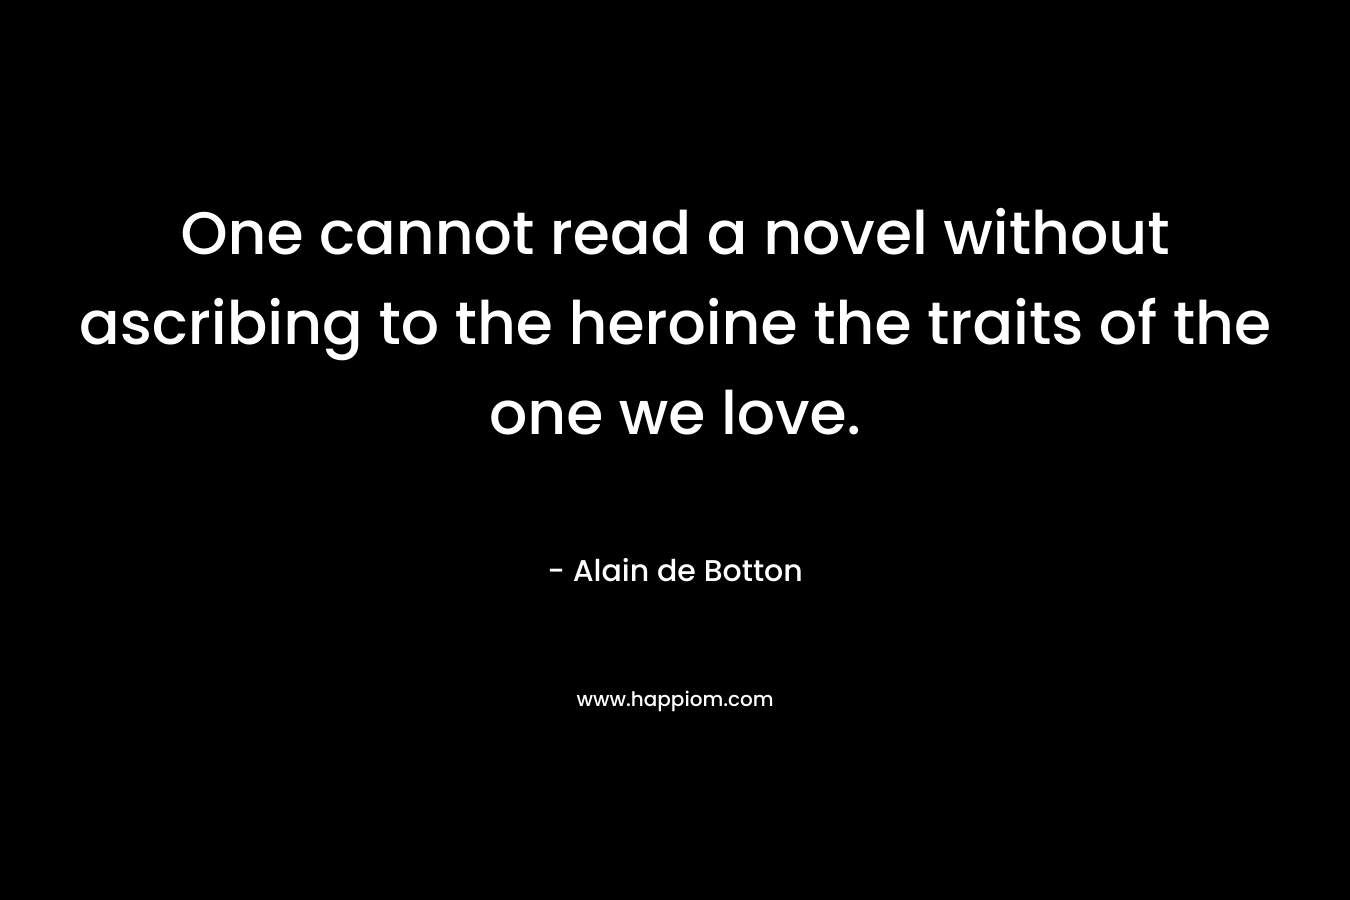 One cannot read a novel without ascribing to the heroine the traits of the one we love.